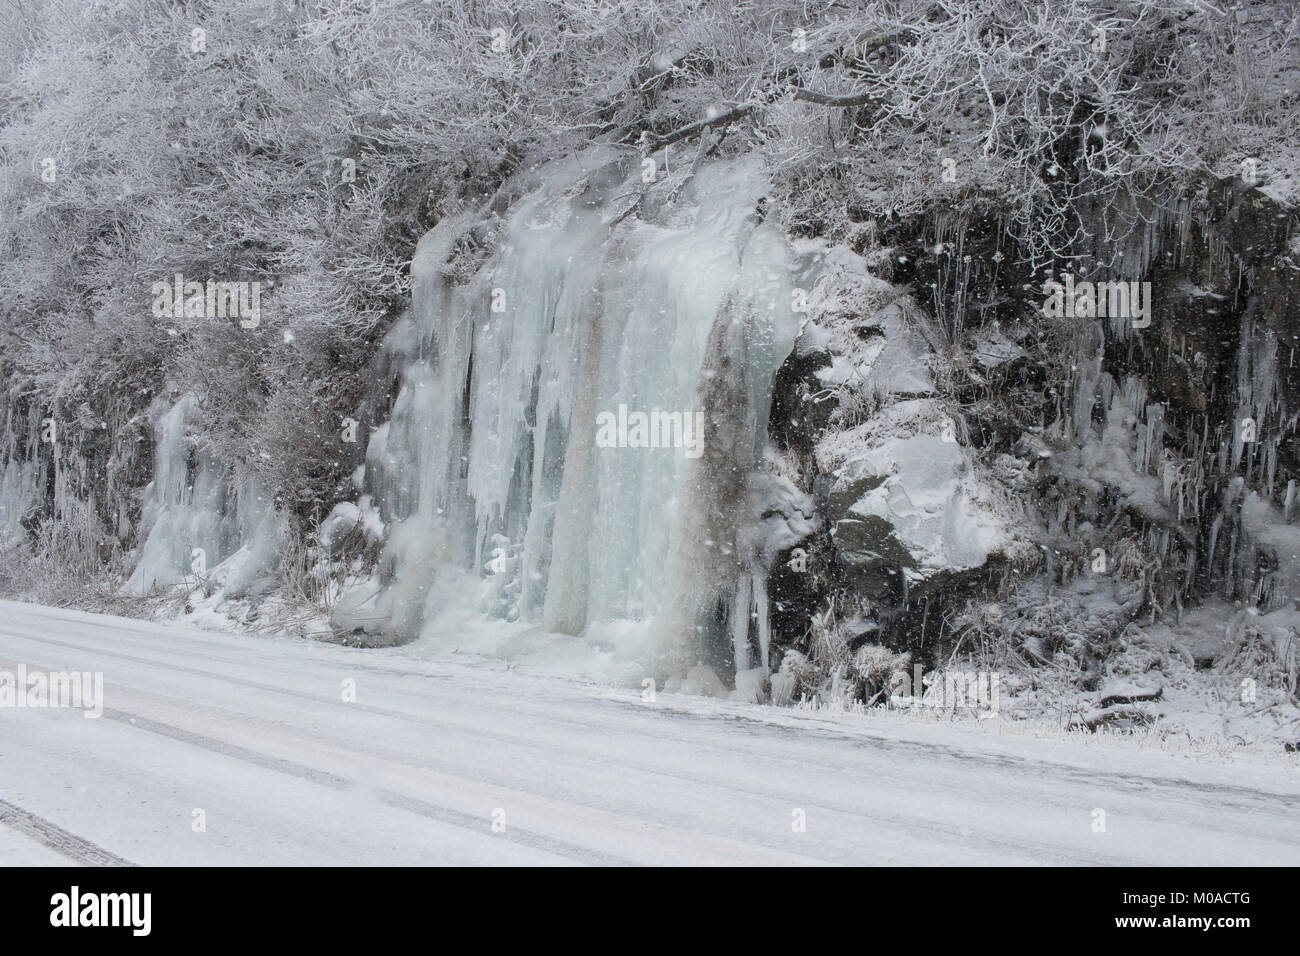 winter image of a frozen ice wall or cliff with ice sickles. Stock Photo